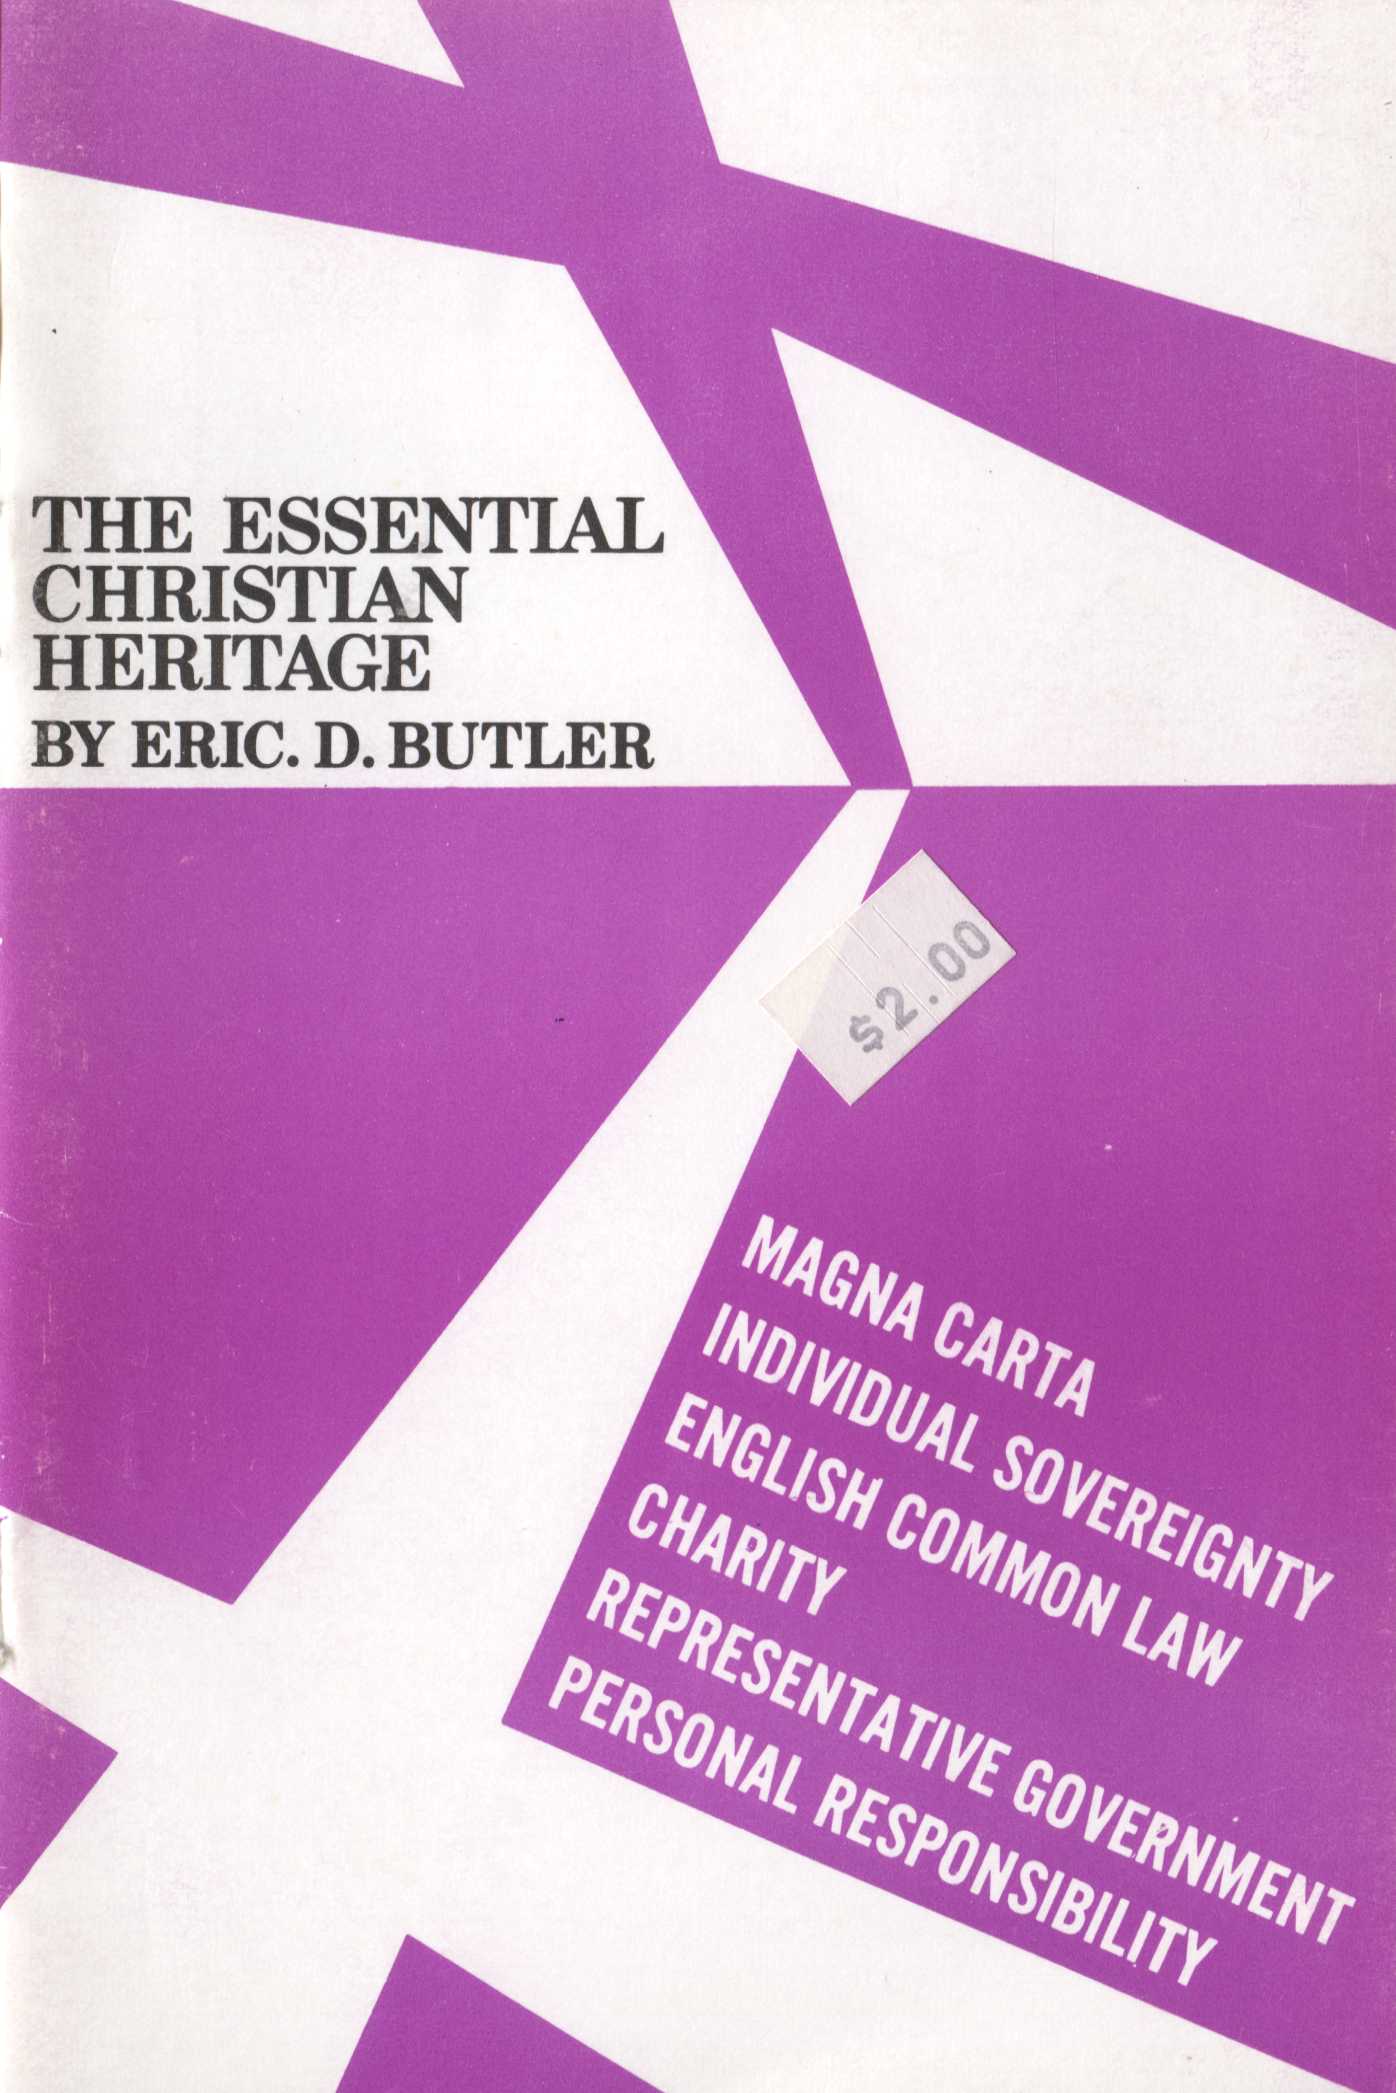 Essential Christian Heritage Booklet By Eric D. Butler